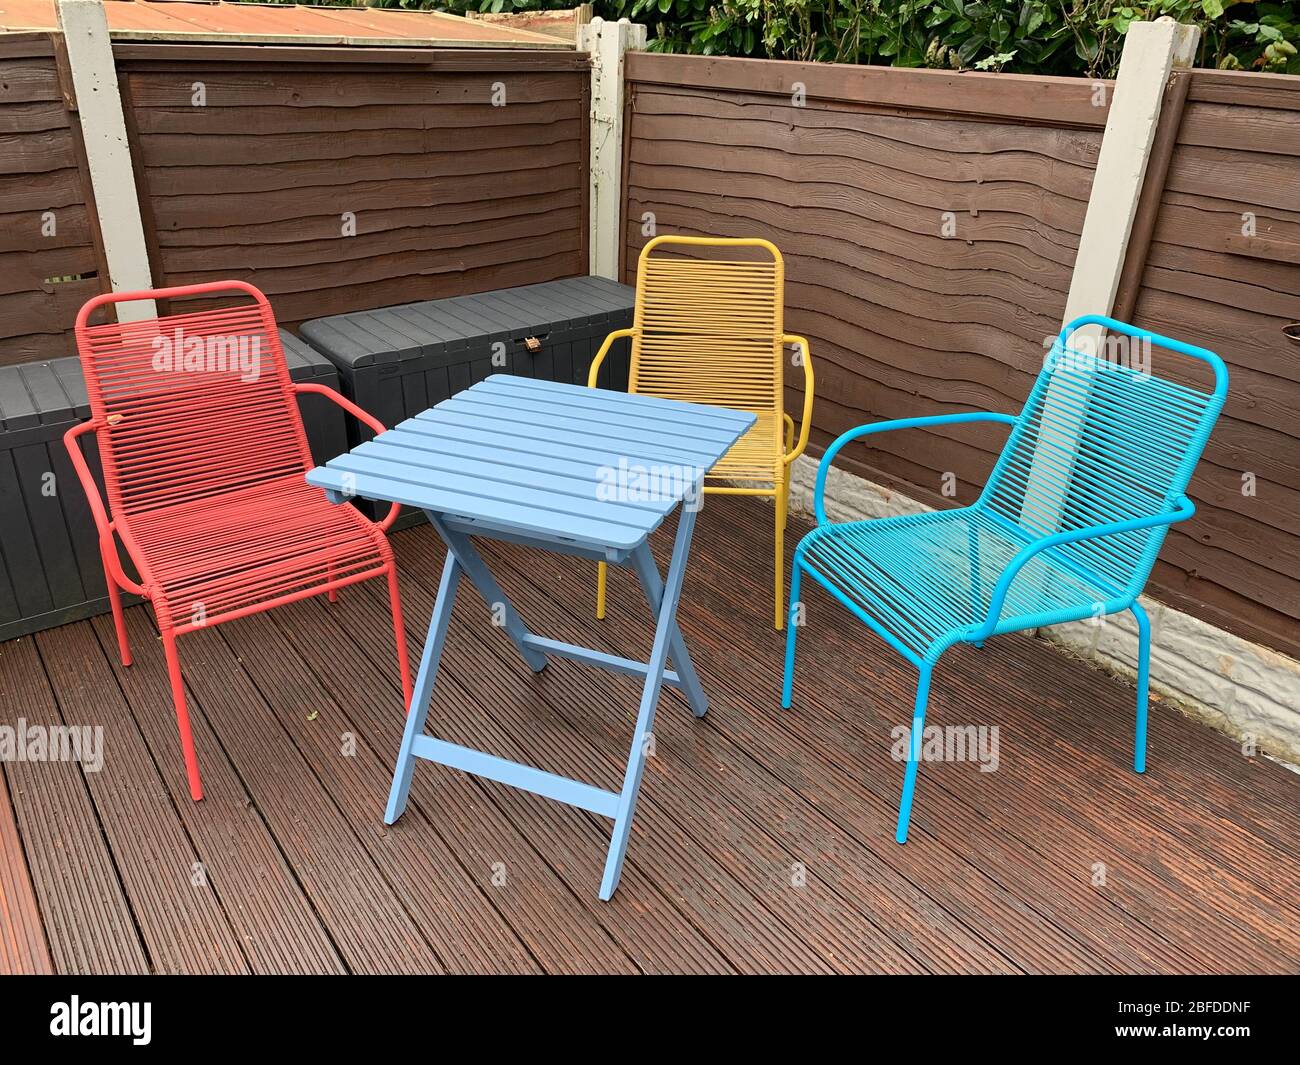 A Bright Coloured Outdoor Bistro Garden Table And Chairs On Some